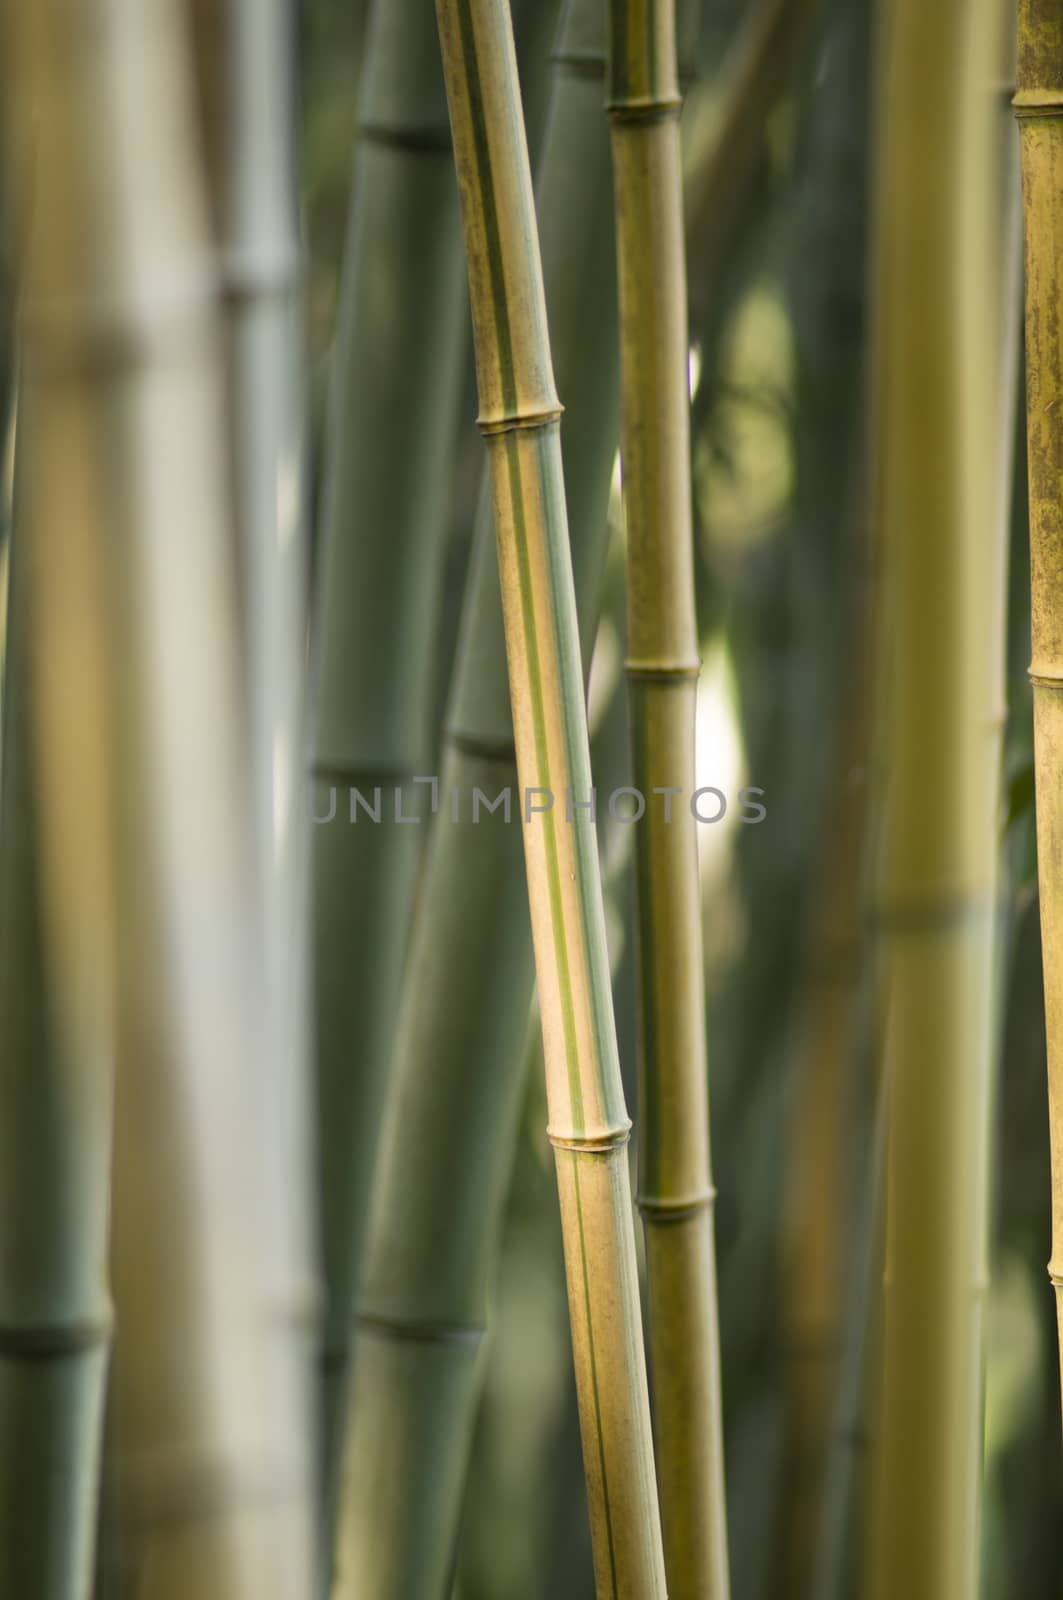 Green and brown Bamboo detail with side sun light